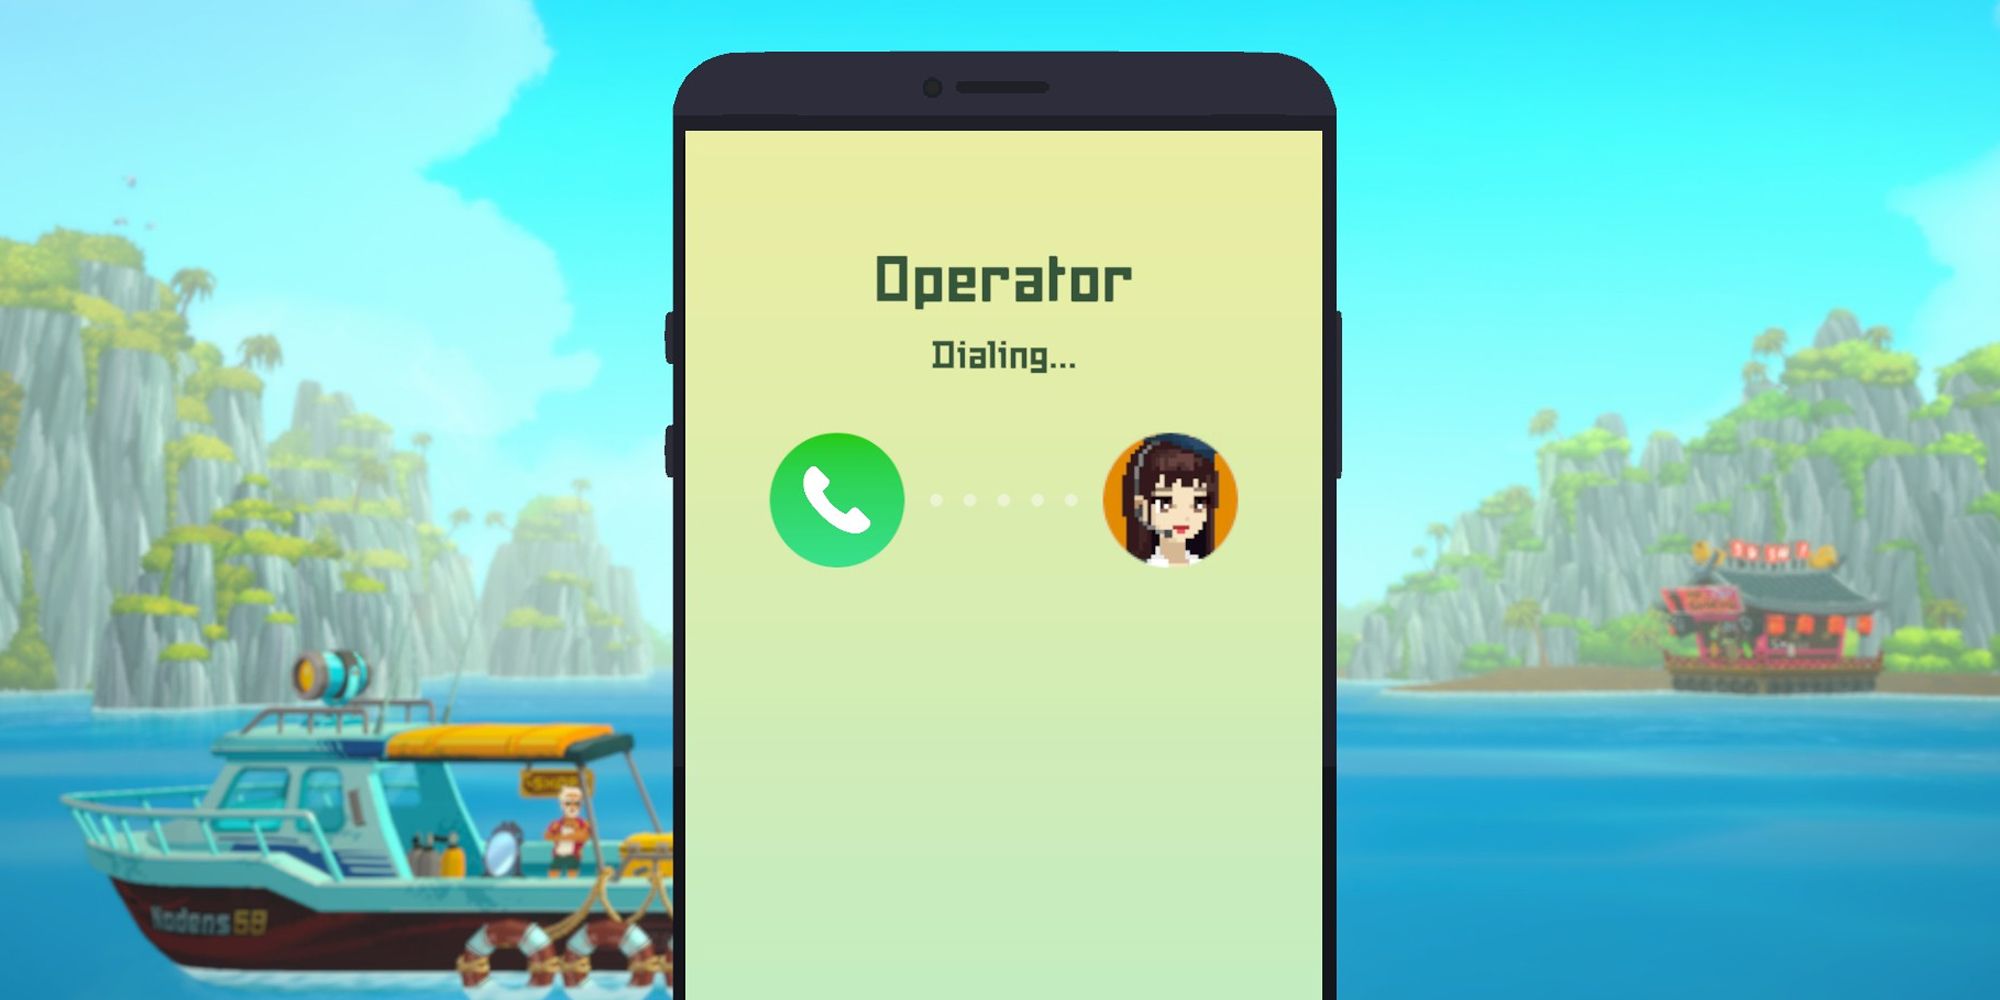 Dialing the operator from the phone in Dave the Diver.